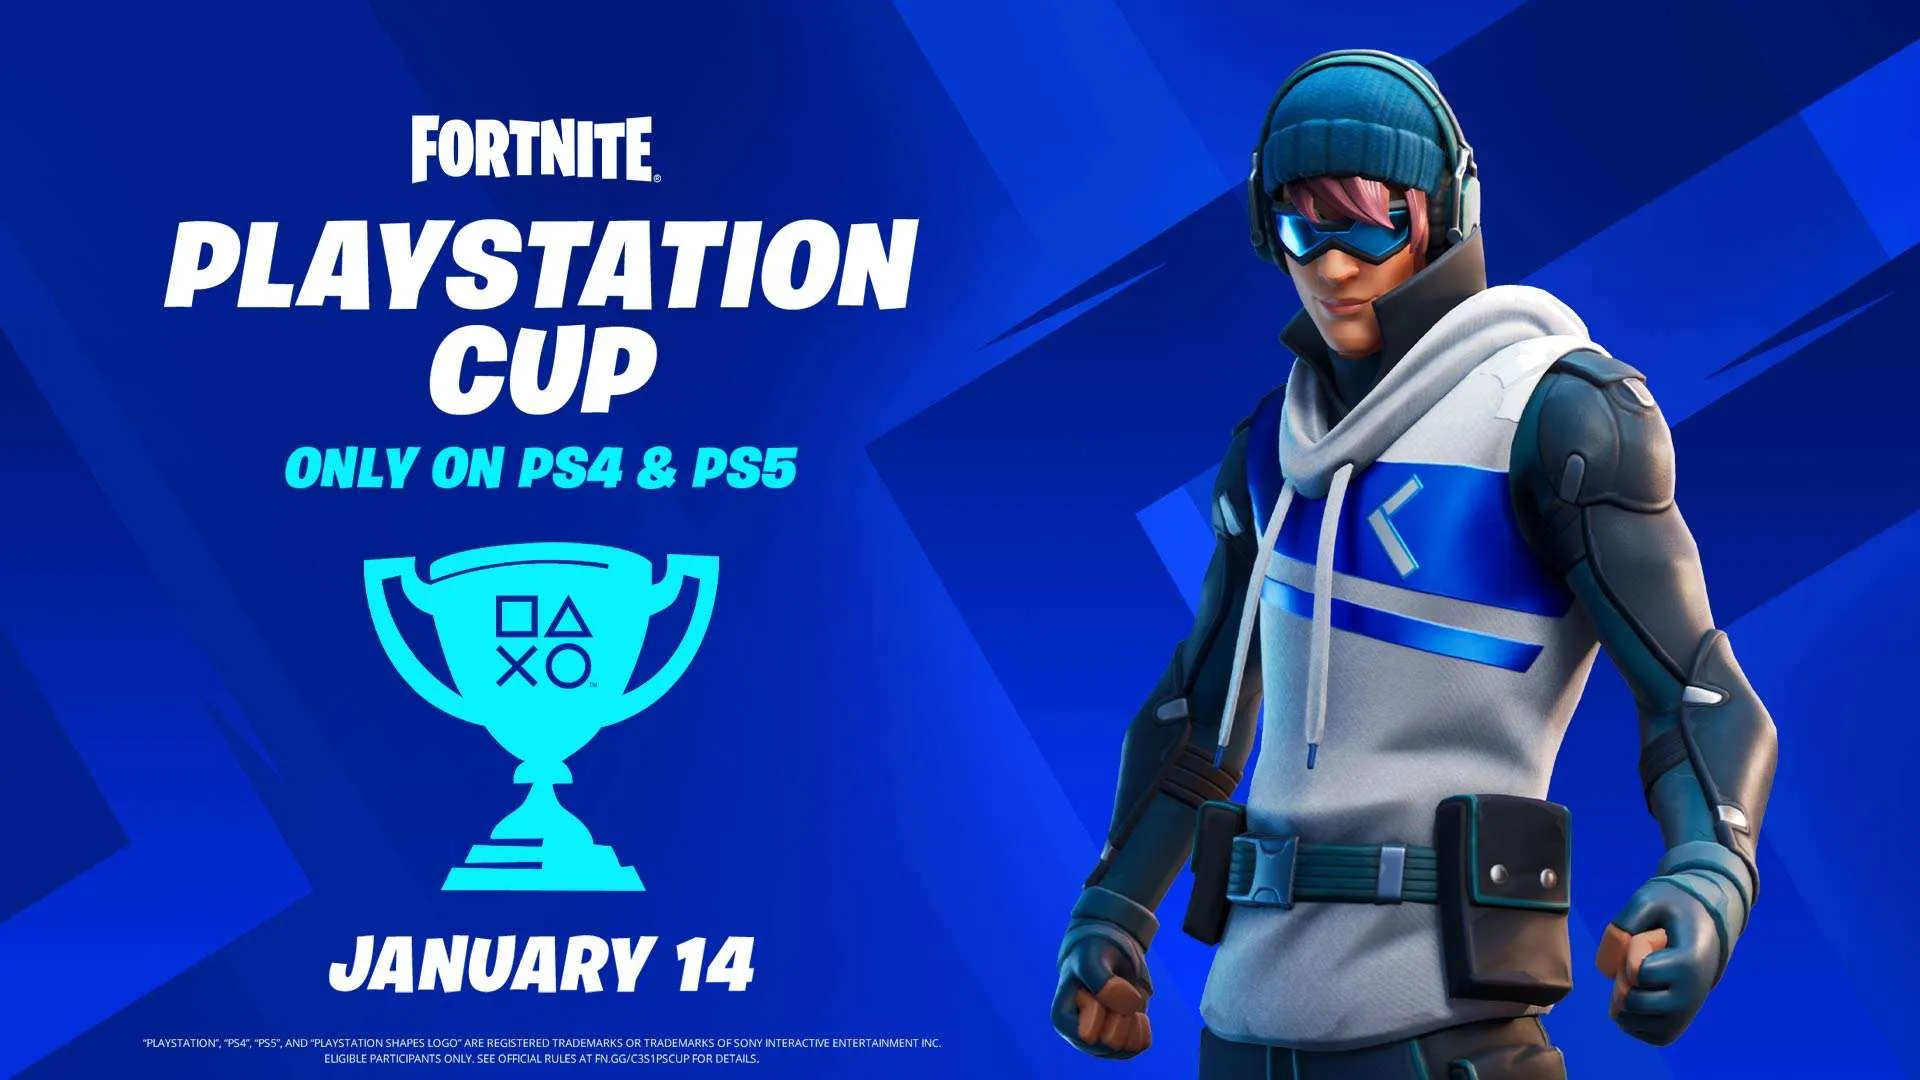 The Fortnite PlayStation Cup